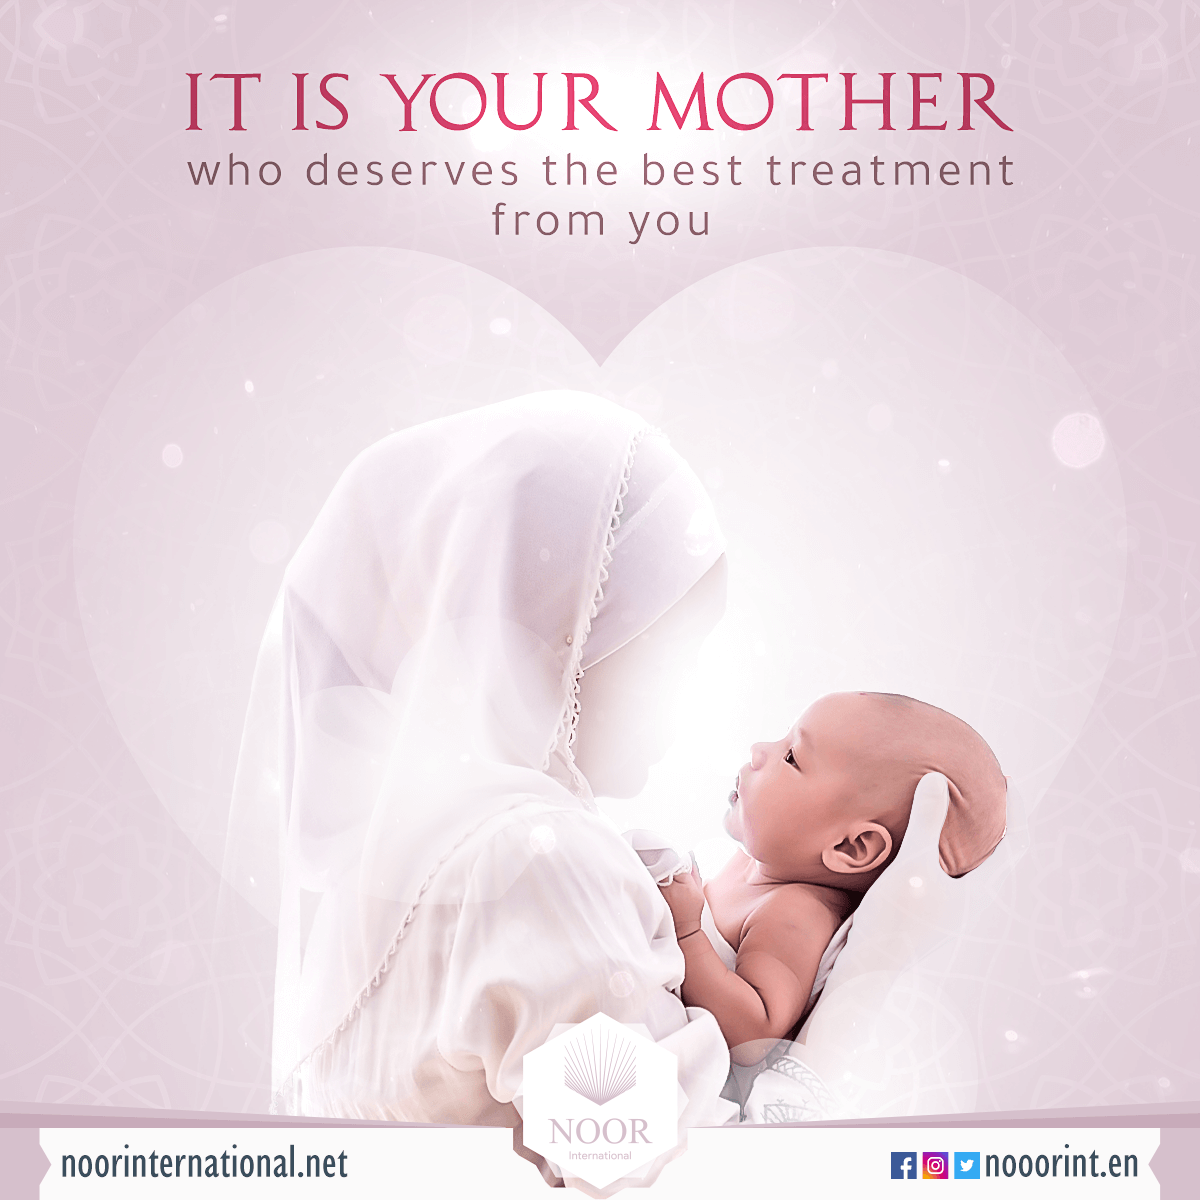 it is your mother (who deserves the best treatment from you)